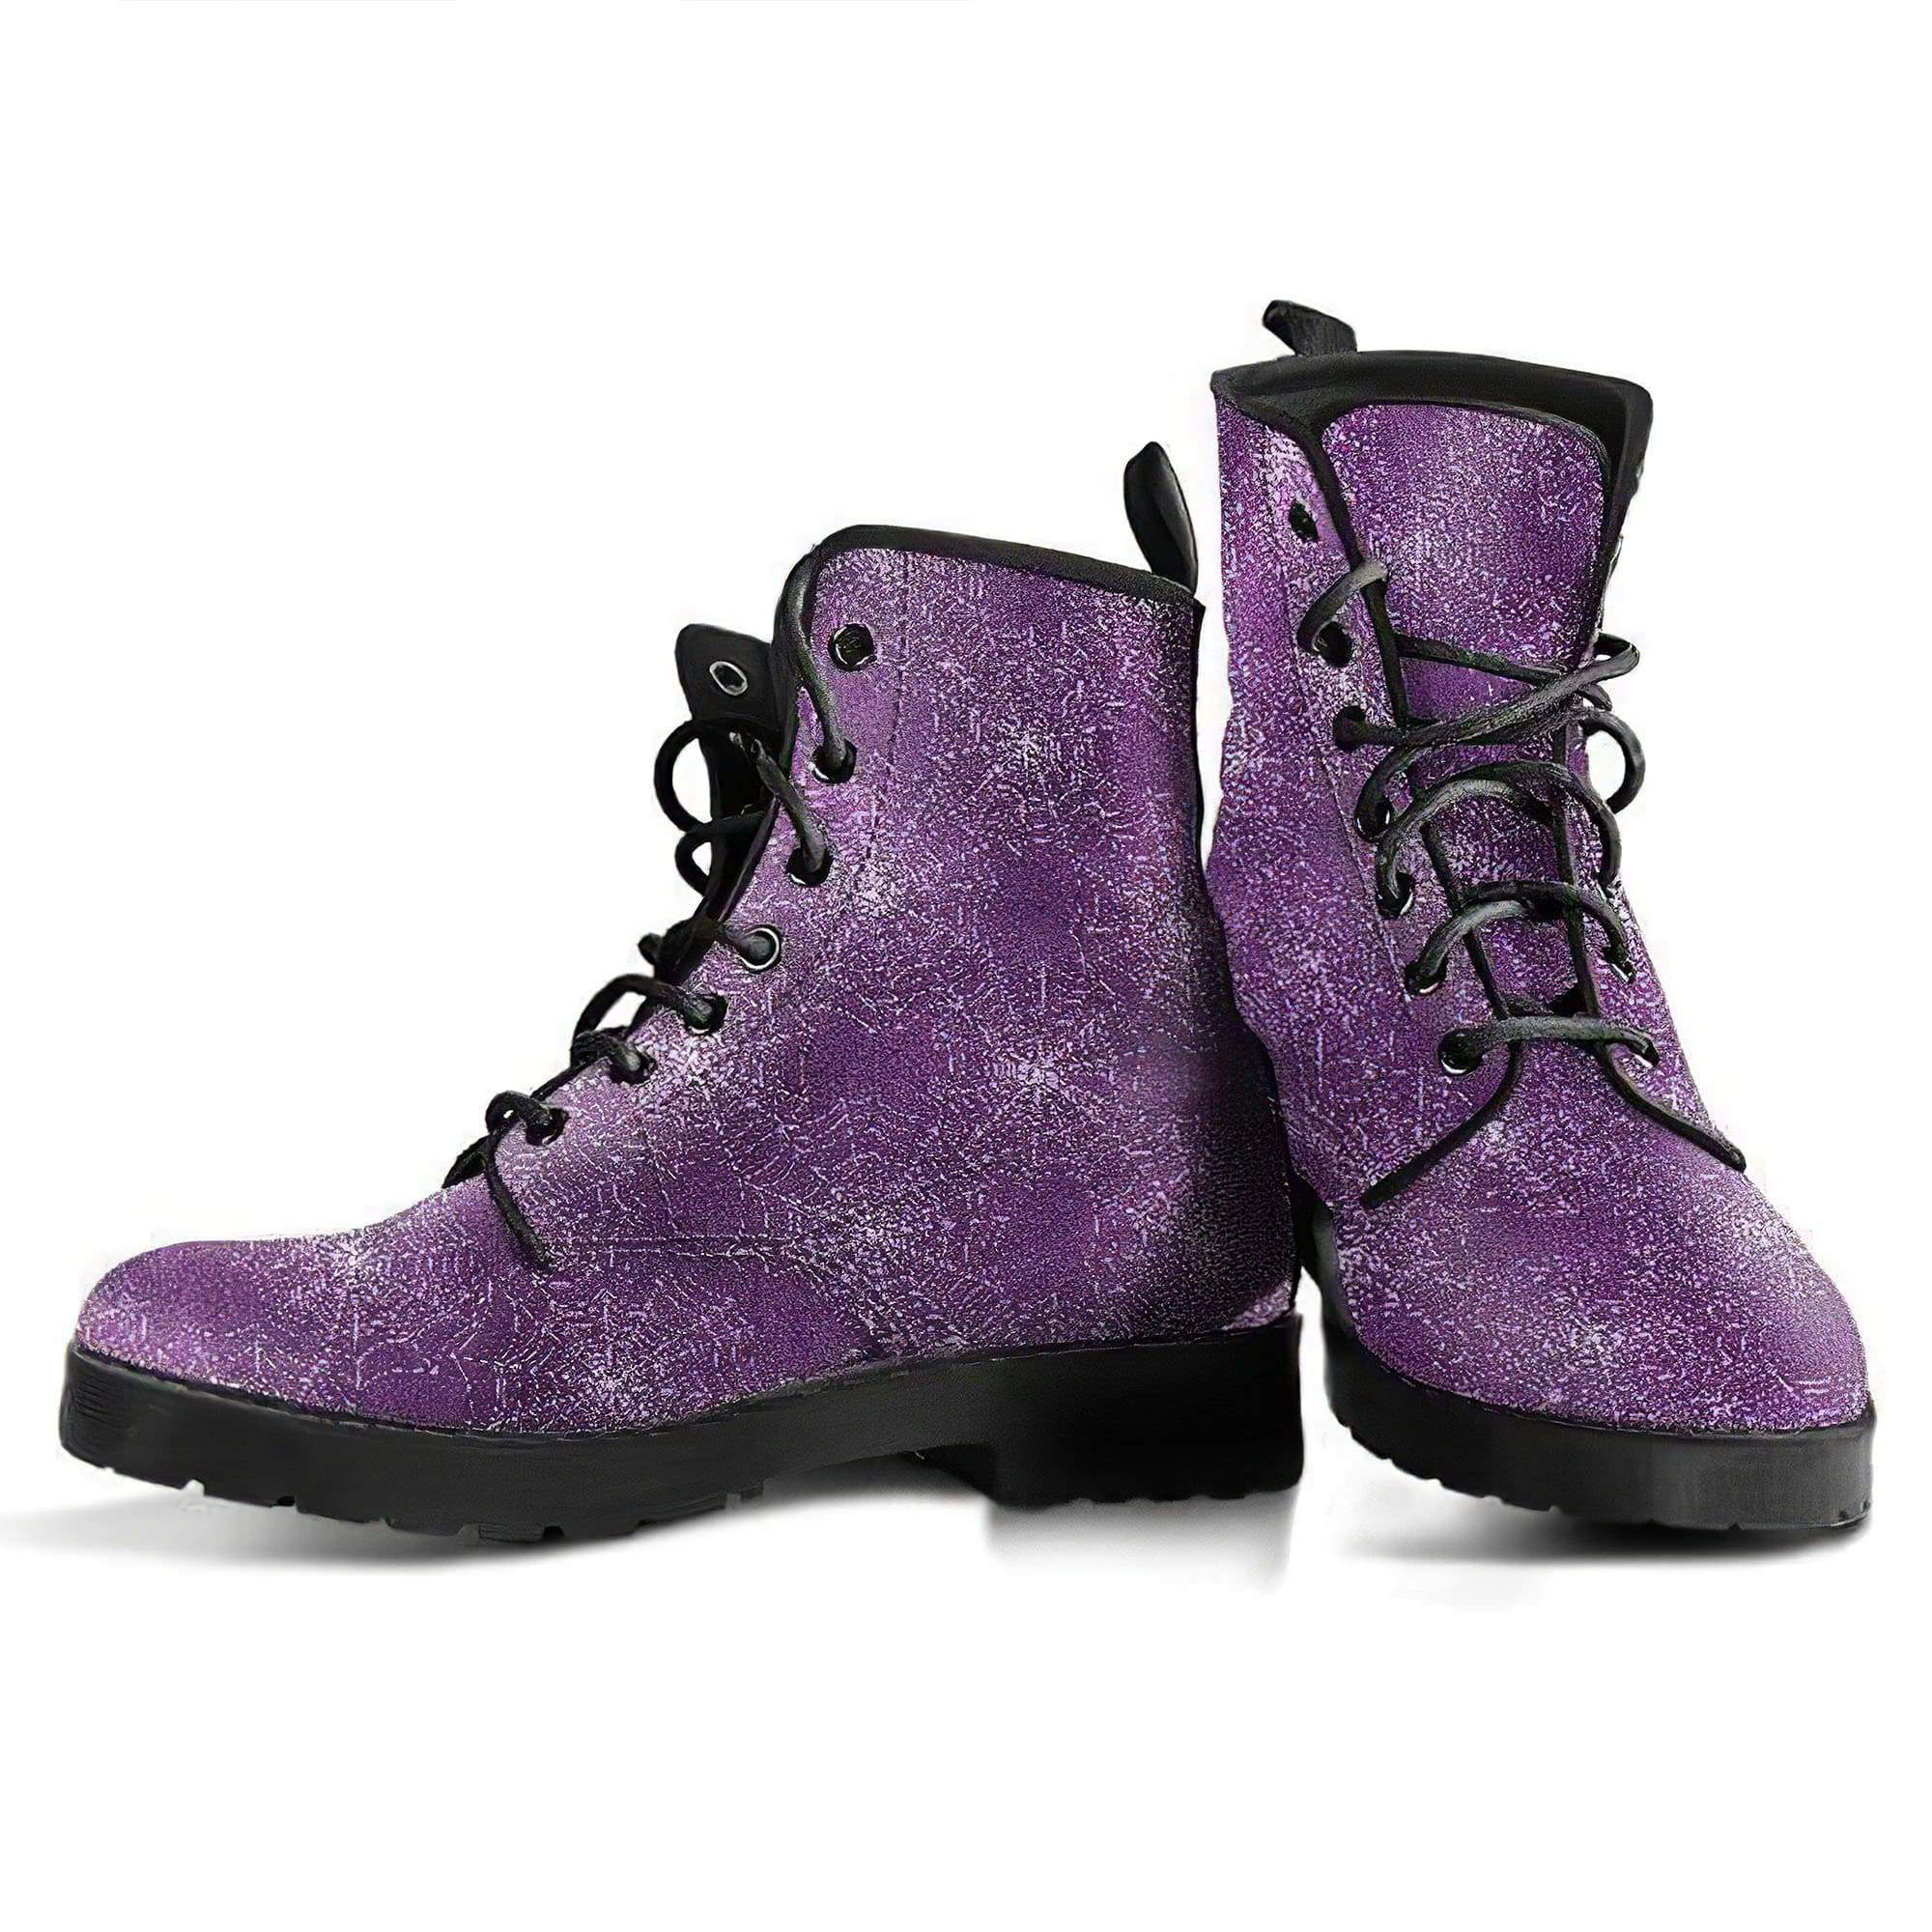 spider-web-faux-leather-purple-boots-women-s-leather-boots-12051951484989.jpg